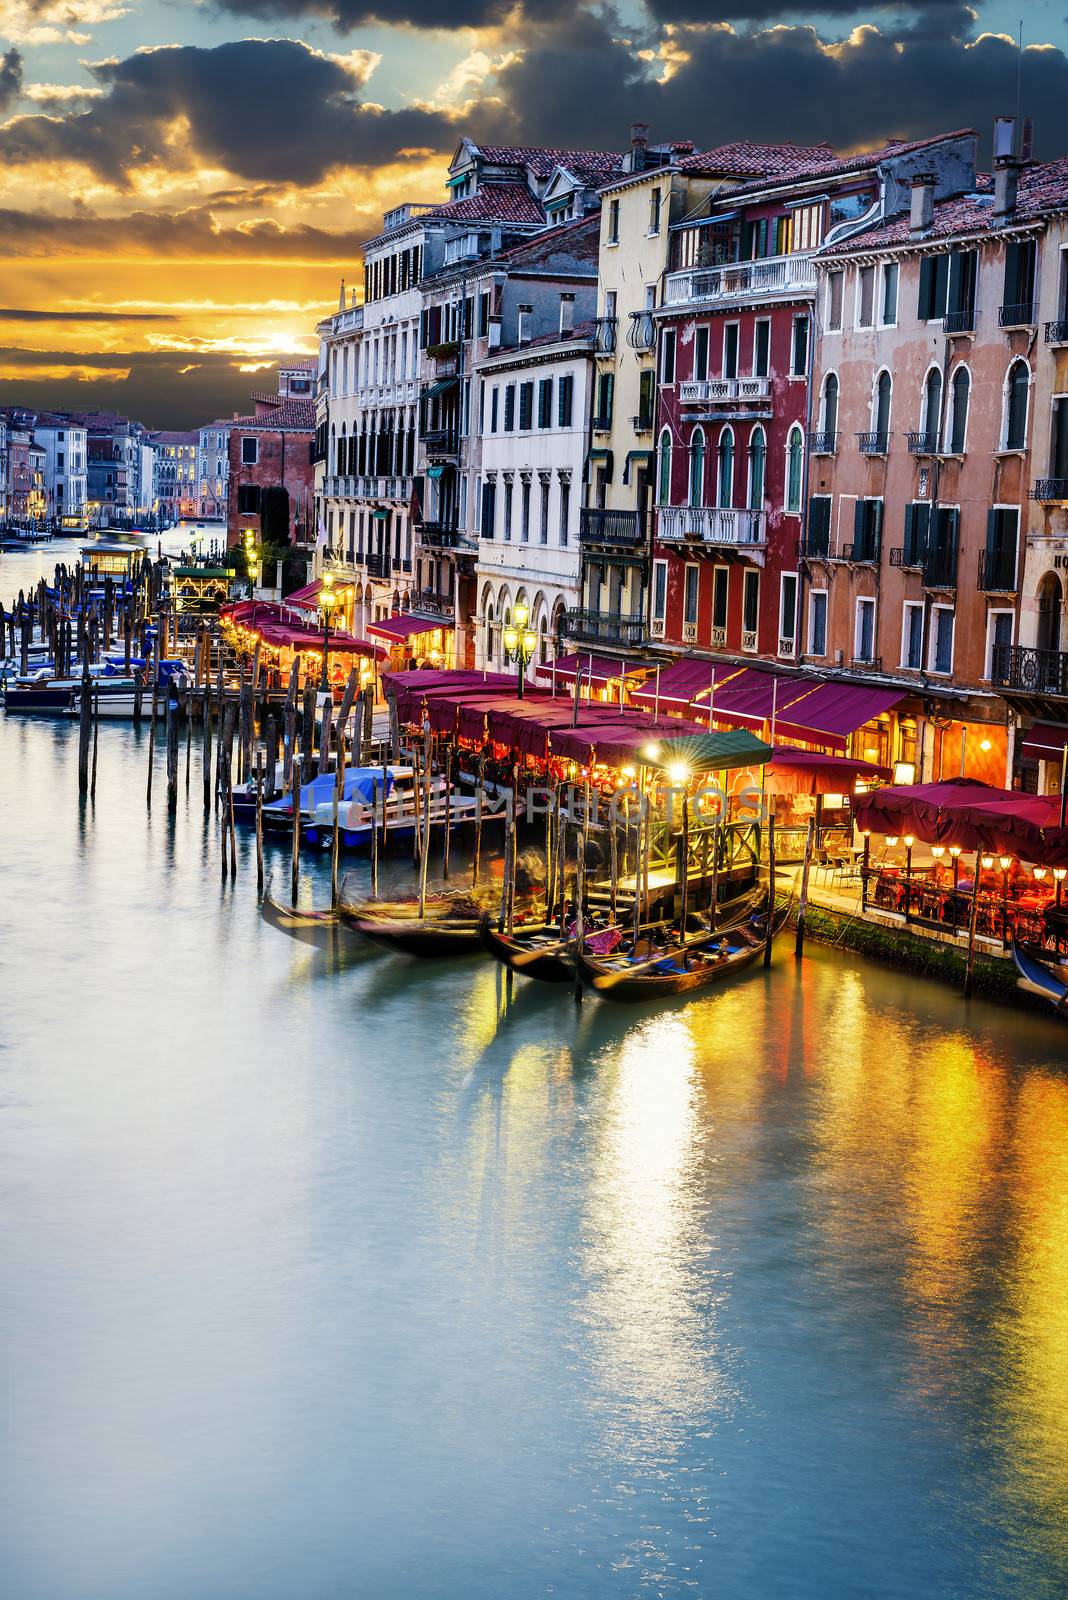 famous grand canale from Rialto Bridge at blue hour, Venice, Italy